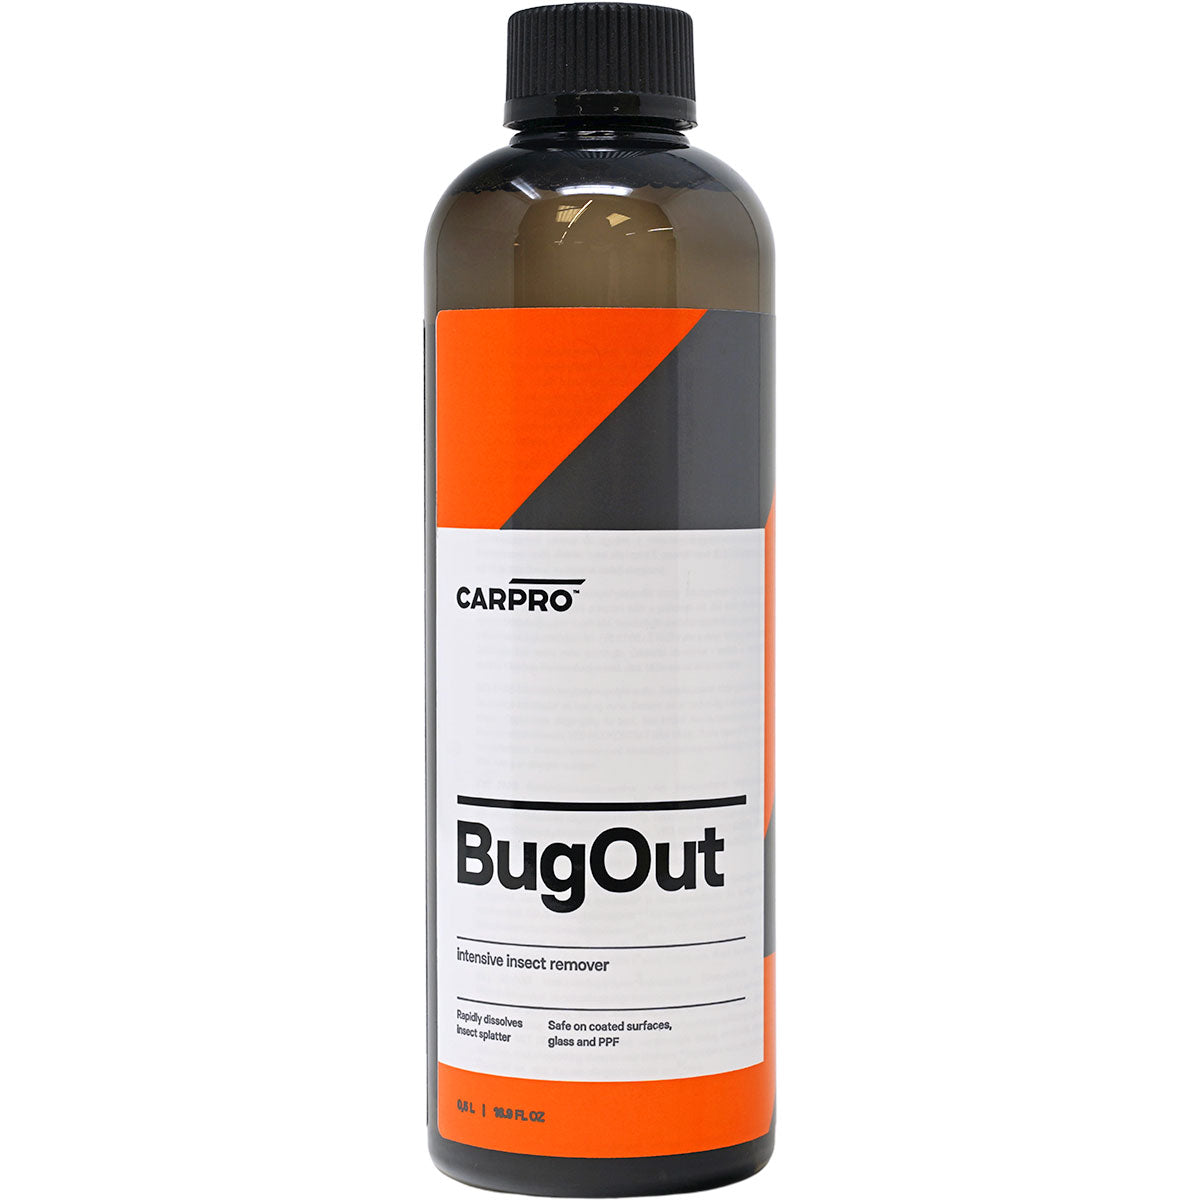 Car Pro - Bug Out Insect remover